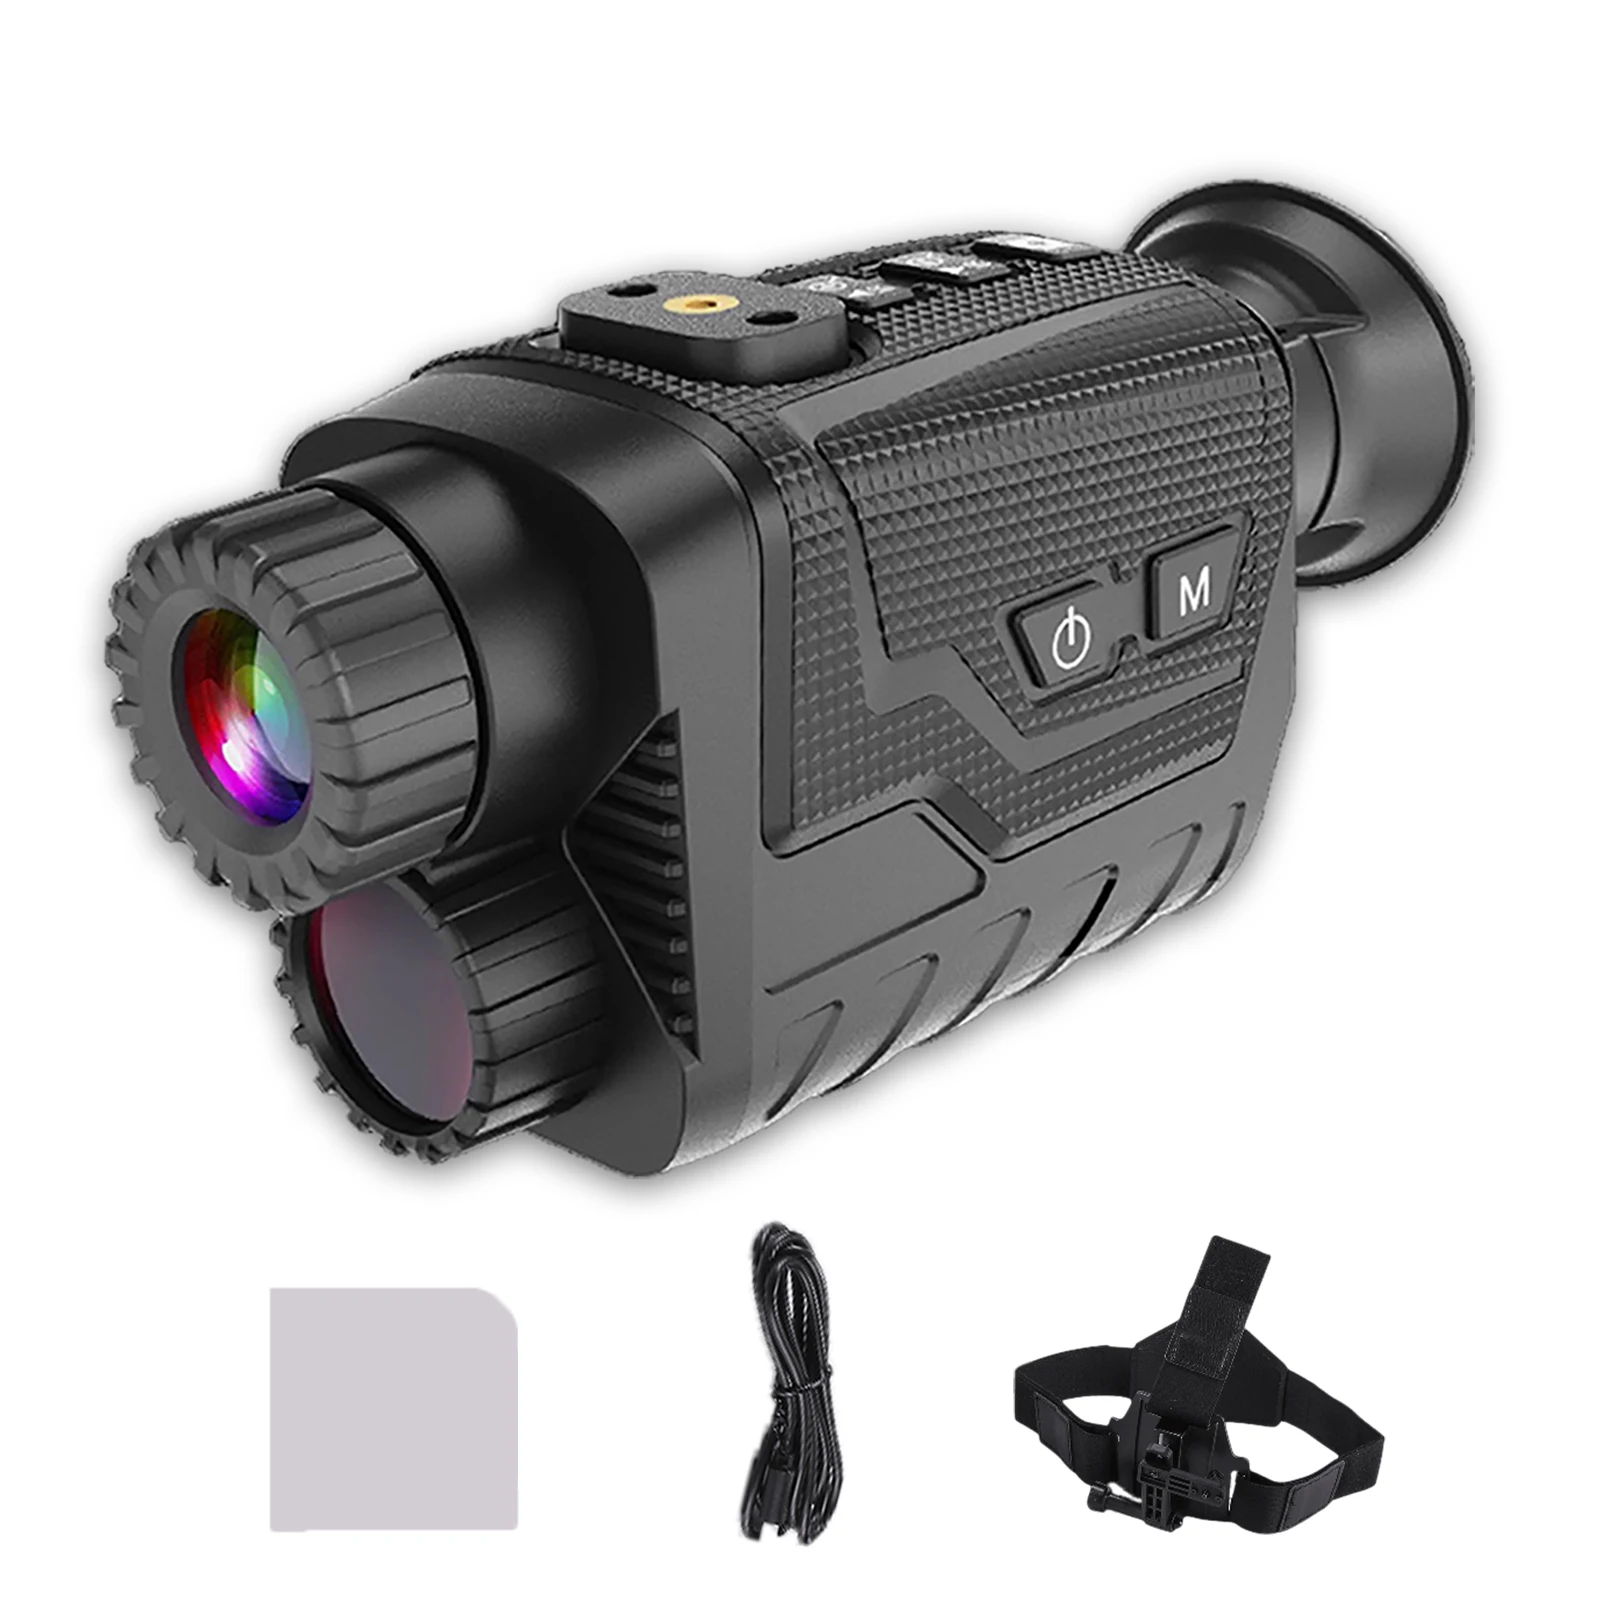 

NV8260 Helmet Night Vision Goggles for Hunting Patrol FHD 4K Video 400M Infrared Camcorder Head Mounted Night Vision Monocular